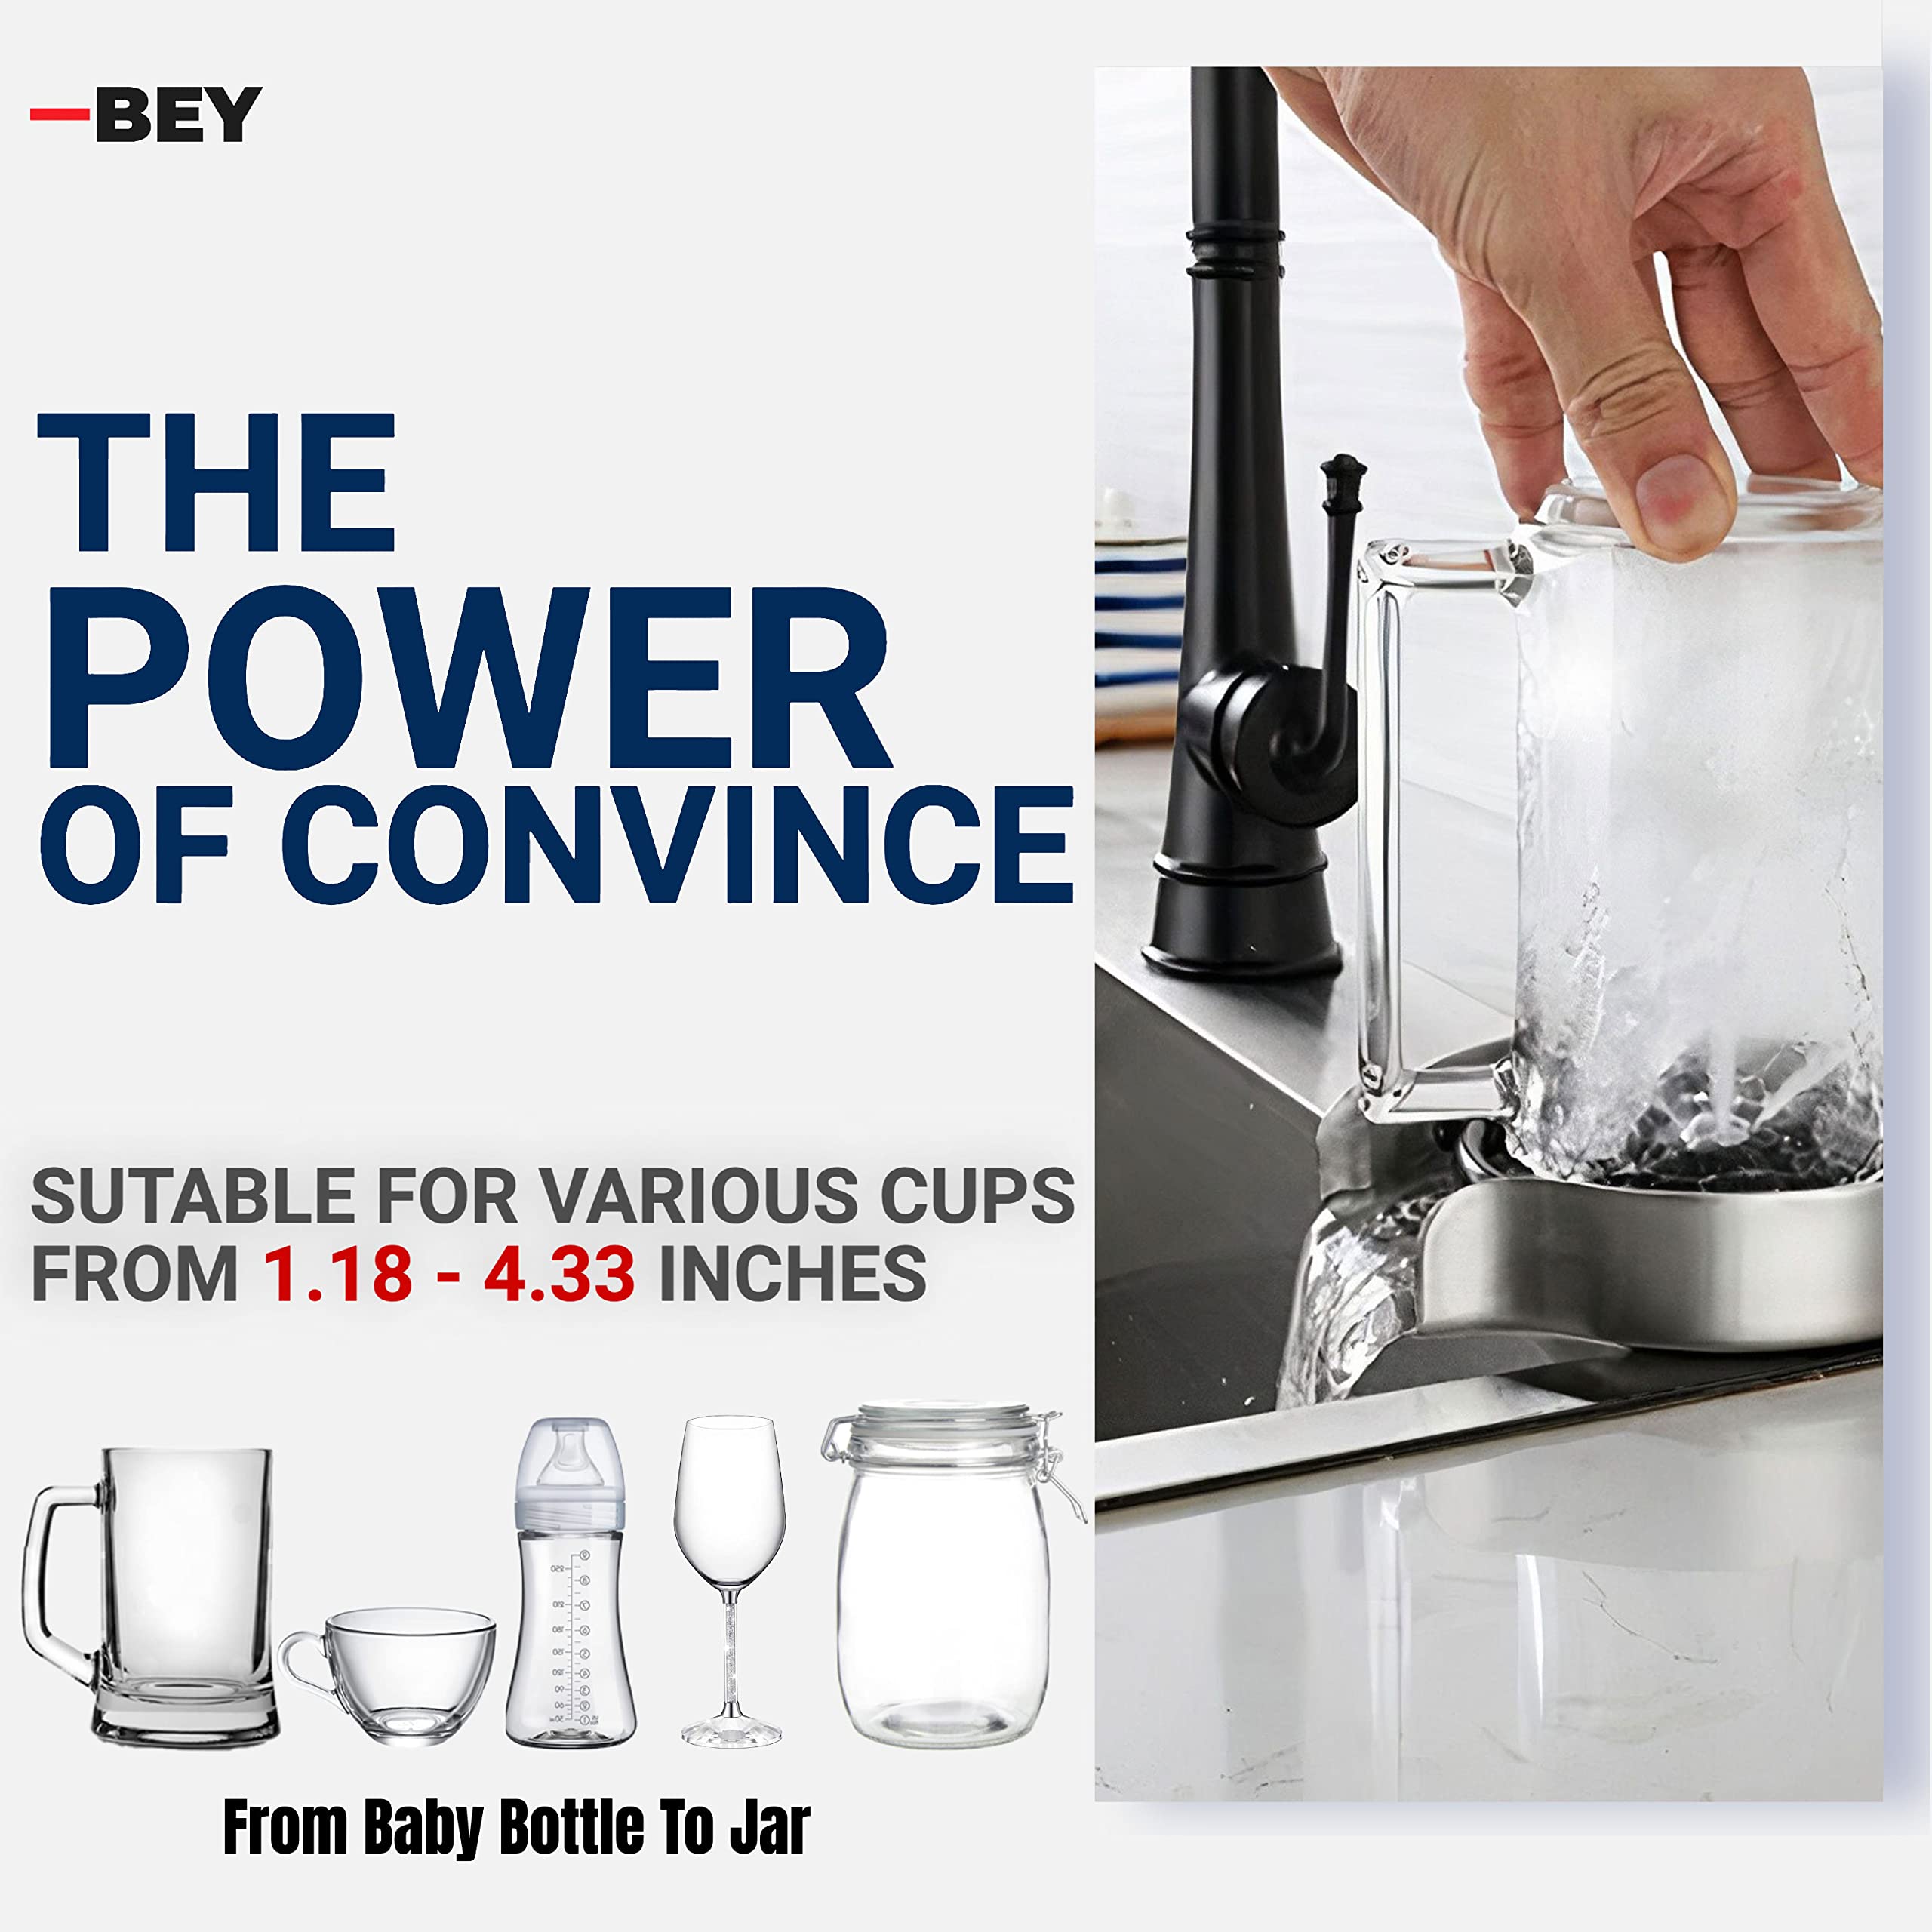 BEY Automatic Glass Rinser - Powerful Cup Washer for Kitchen Sink, Stainless Steel Baby Bottle Cleaner Sinks Attachment, Bar Accessories Spray Metal (Silver Stainless Steel)